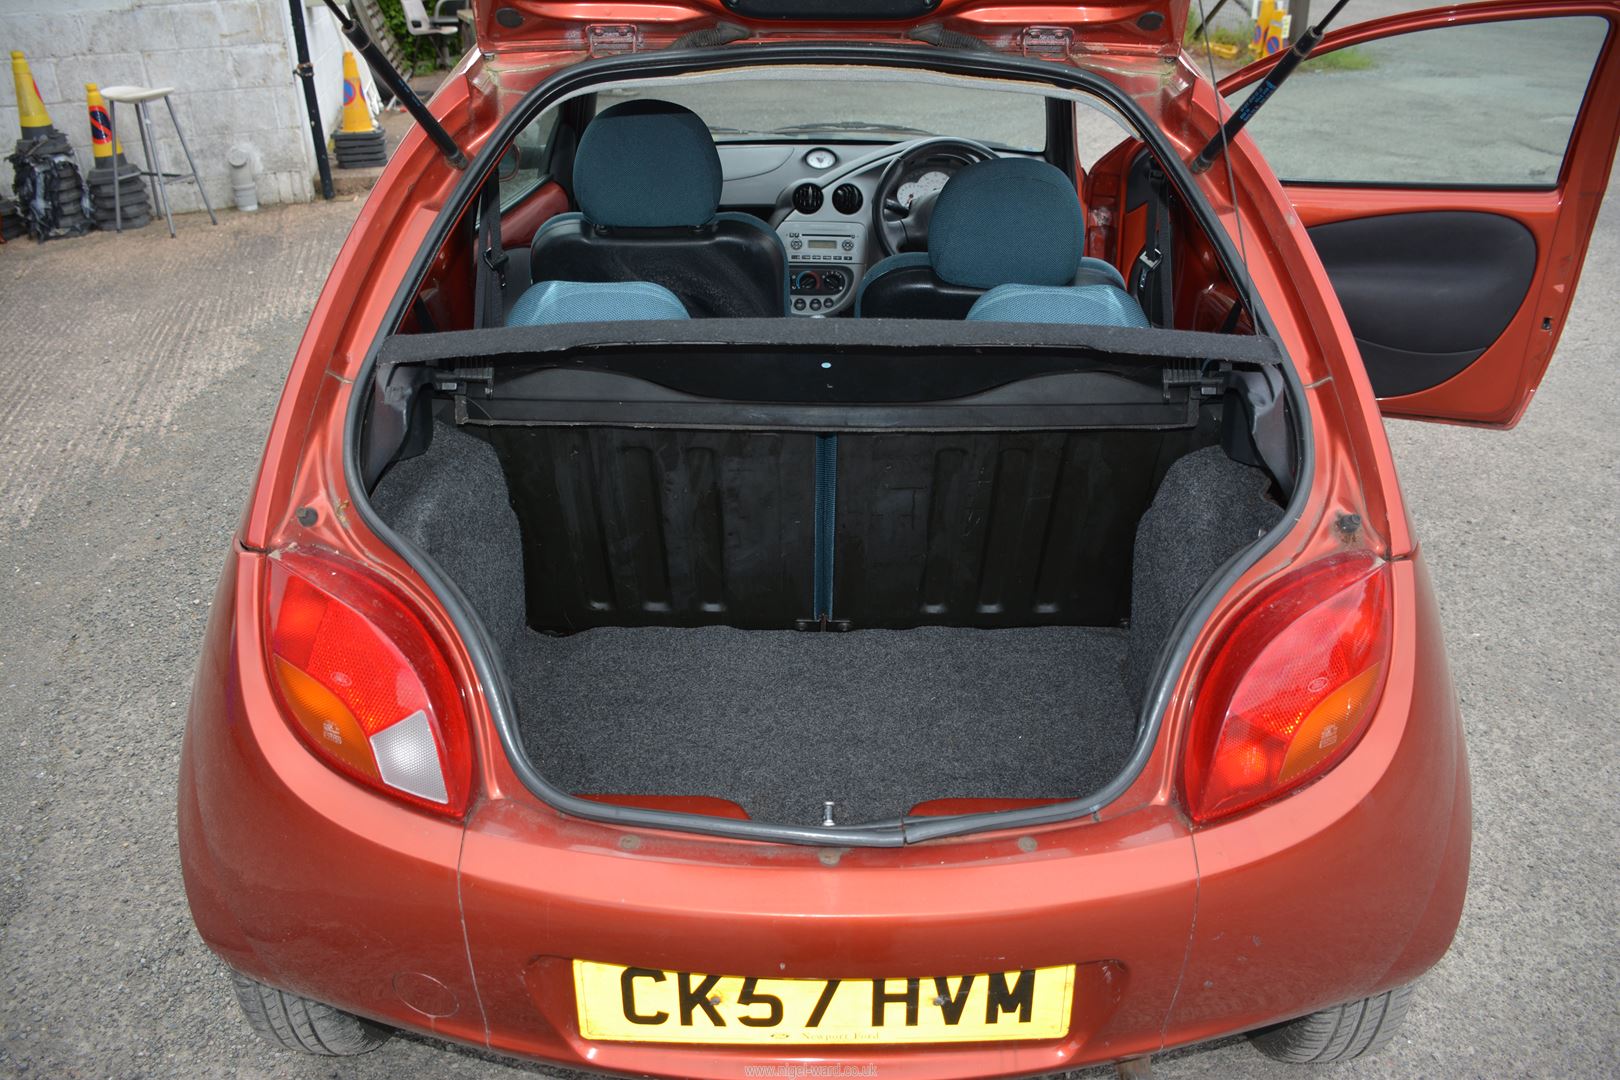 A Ford KA Zetec Climate 1299cc petrol-engined three door hatchback motor Car finished in red, - Image 11 of 14